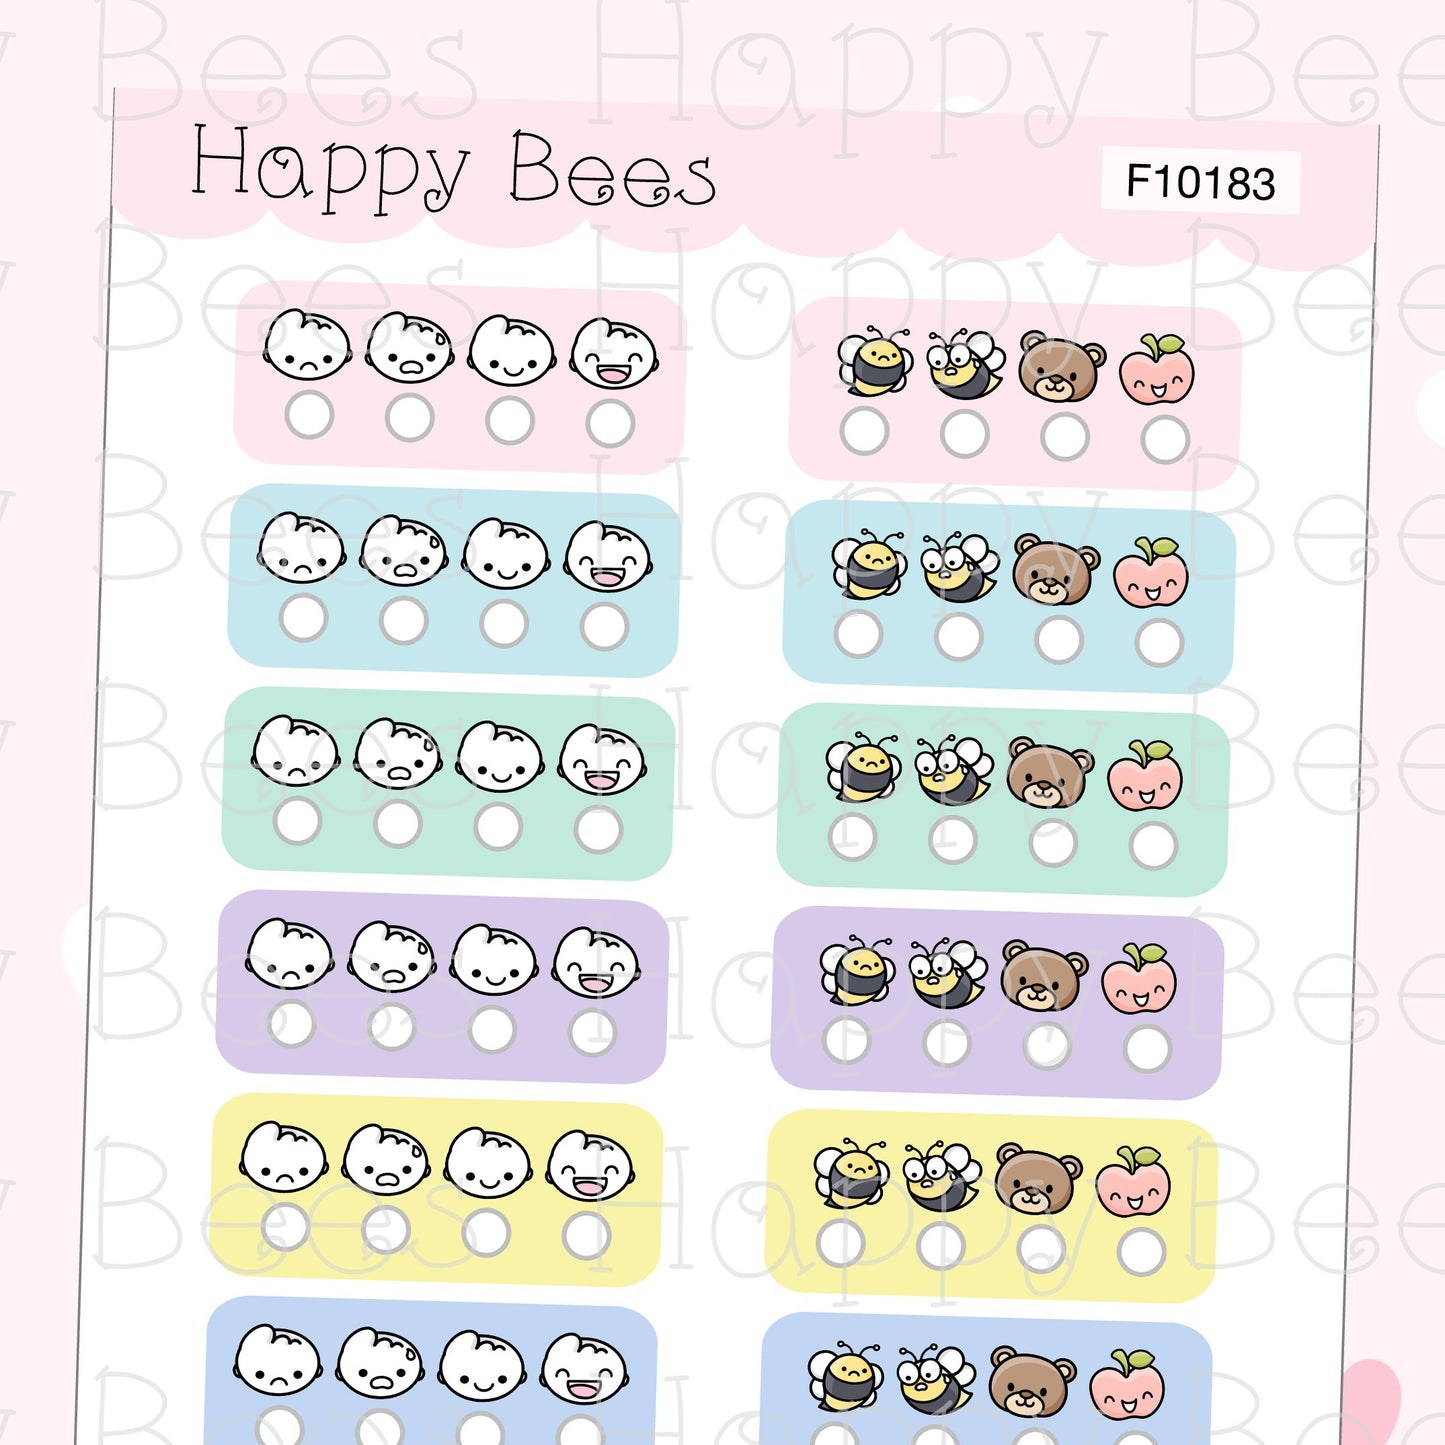 Happy Bees and Friends Mood Trackers - Cute Doodles Hobonichi Cousin Planner Stickers F10183